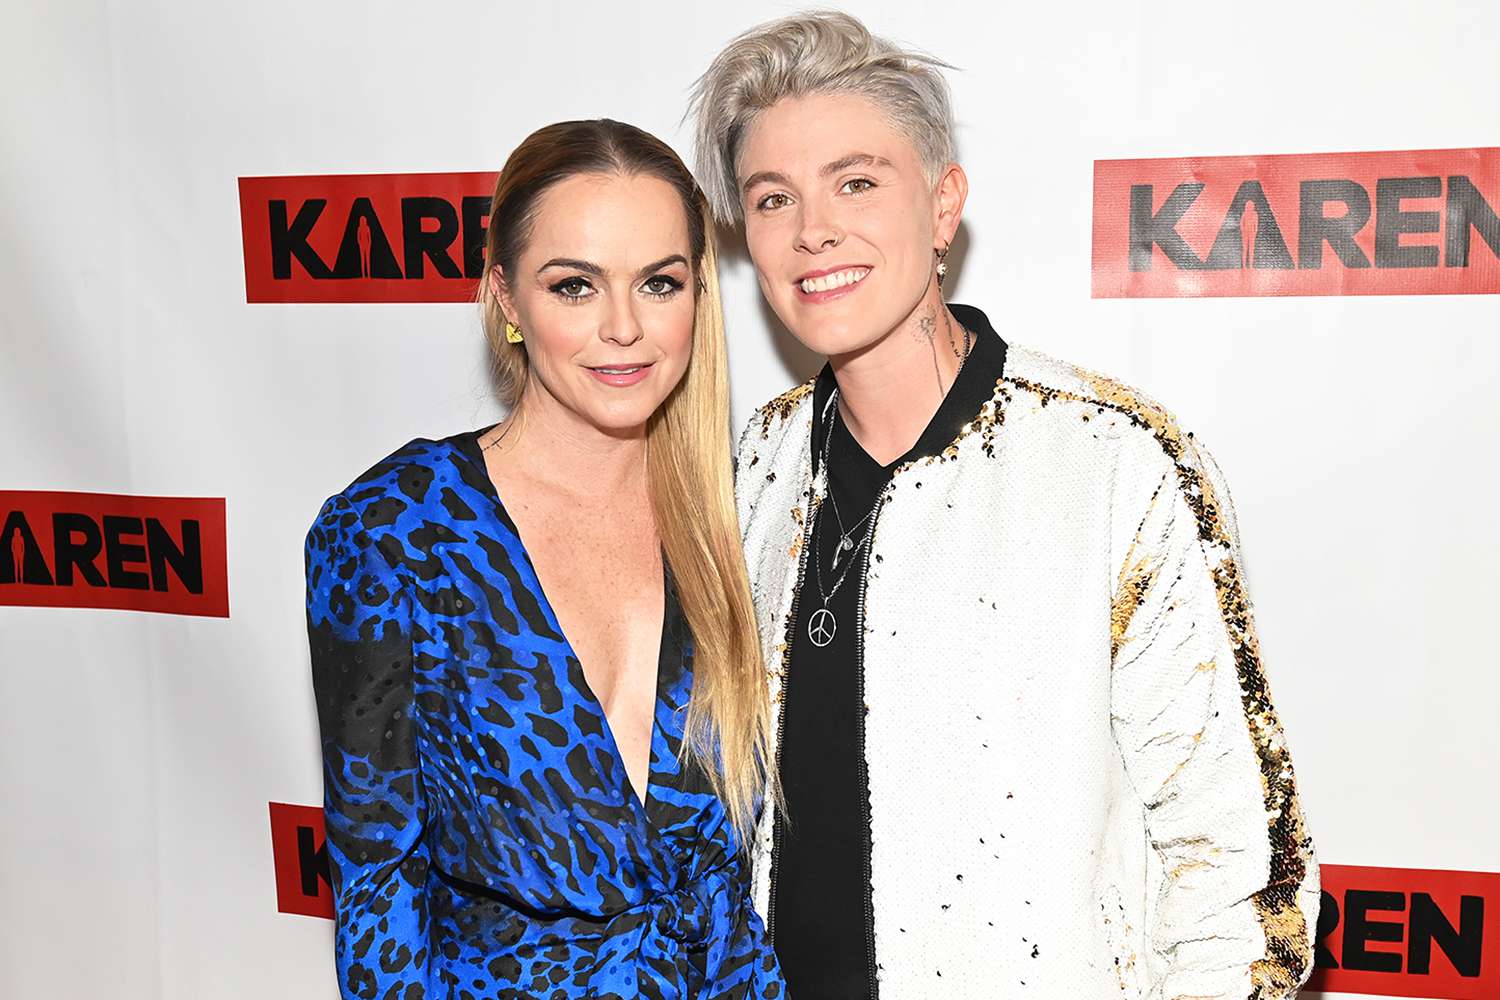 Taryn Manning and musician Anne Cline attend a screening of "Karen" at Silverspot Cinema on August 11, 2021 in Atlanta, Georgia.